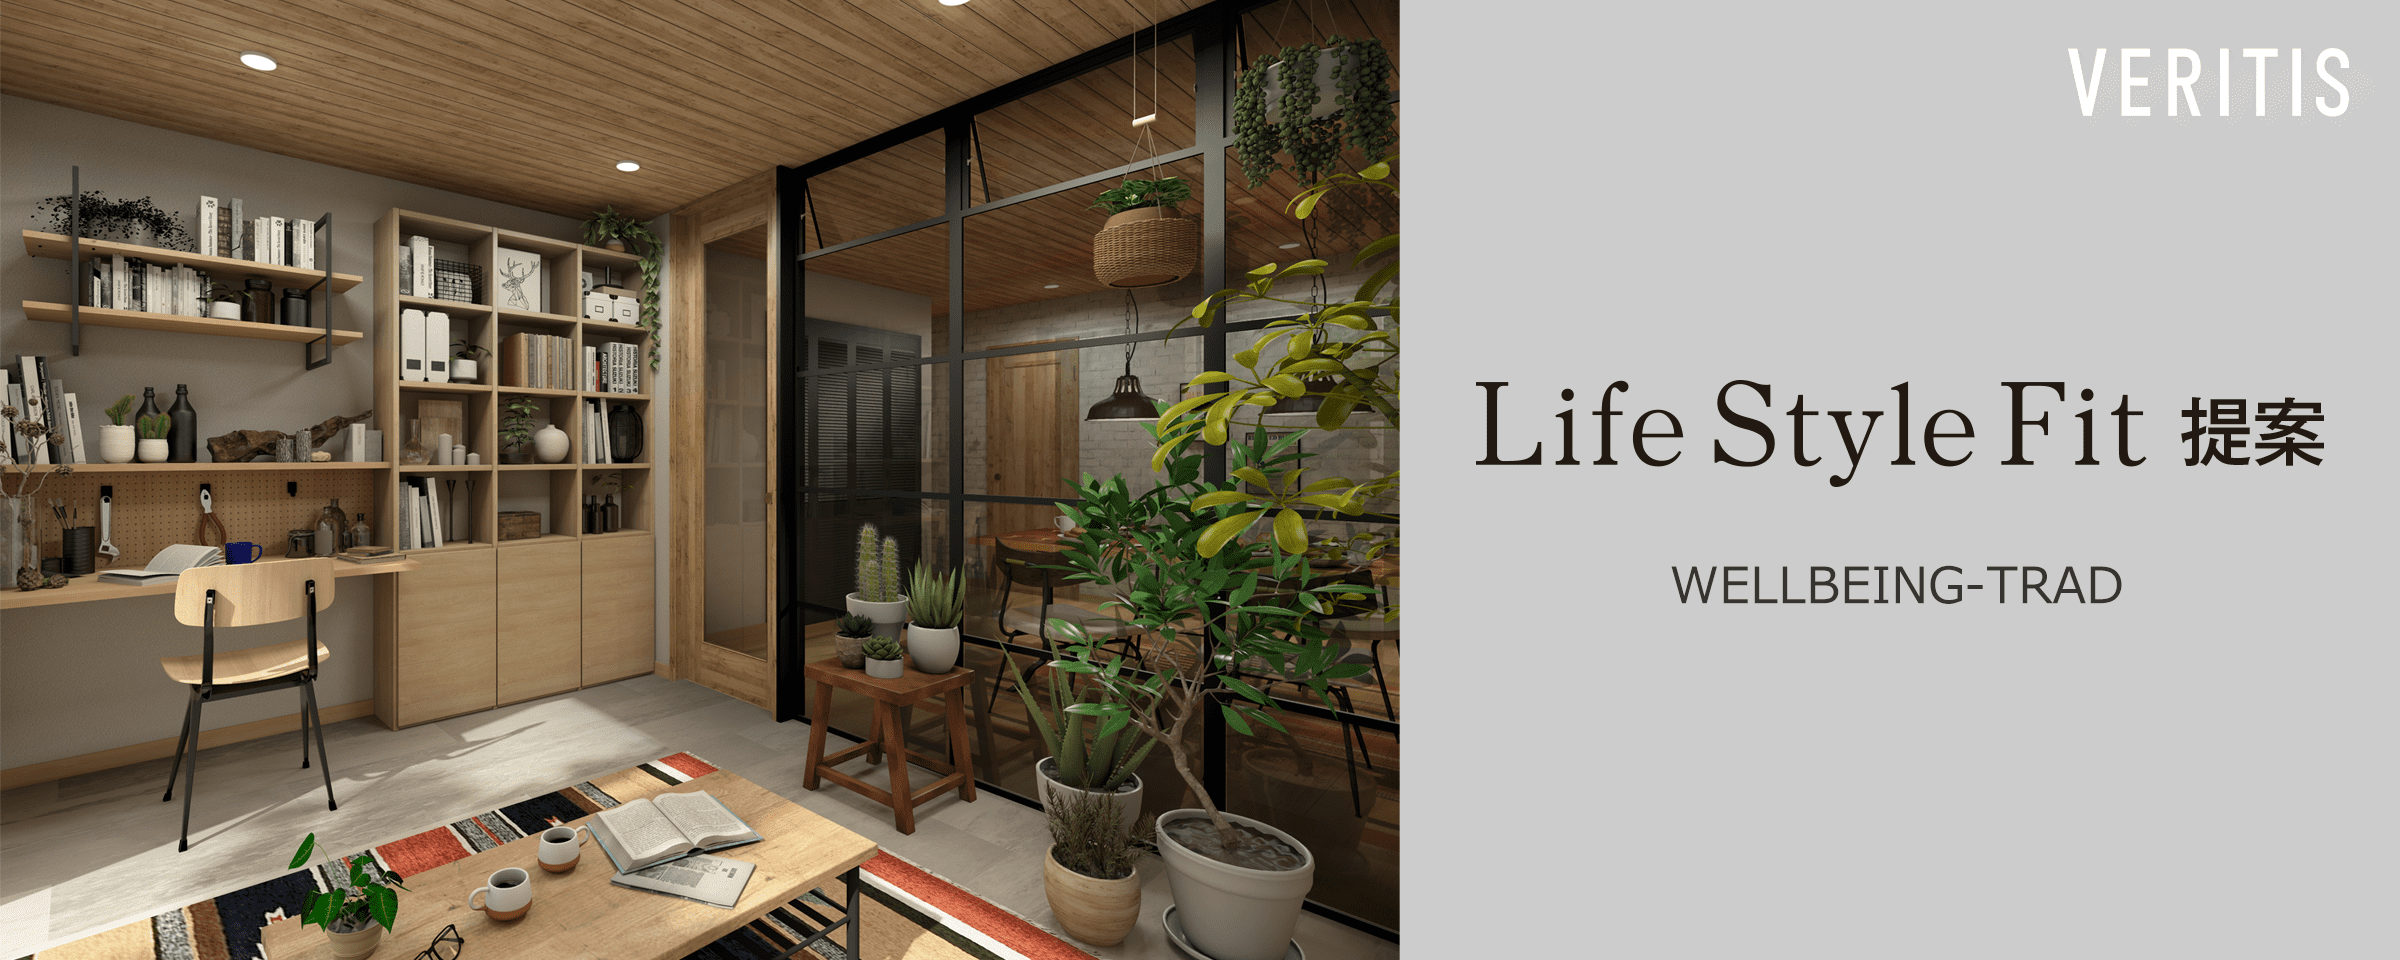 Life style Fit 提案 WELLBEING-TRAD